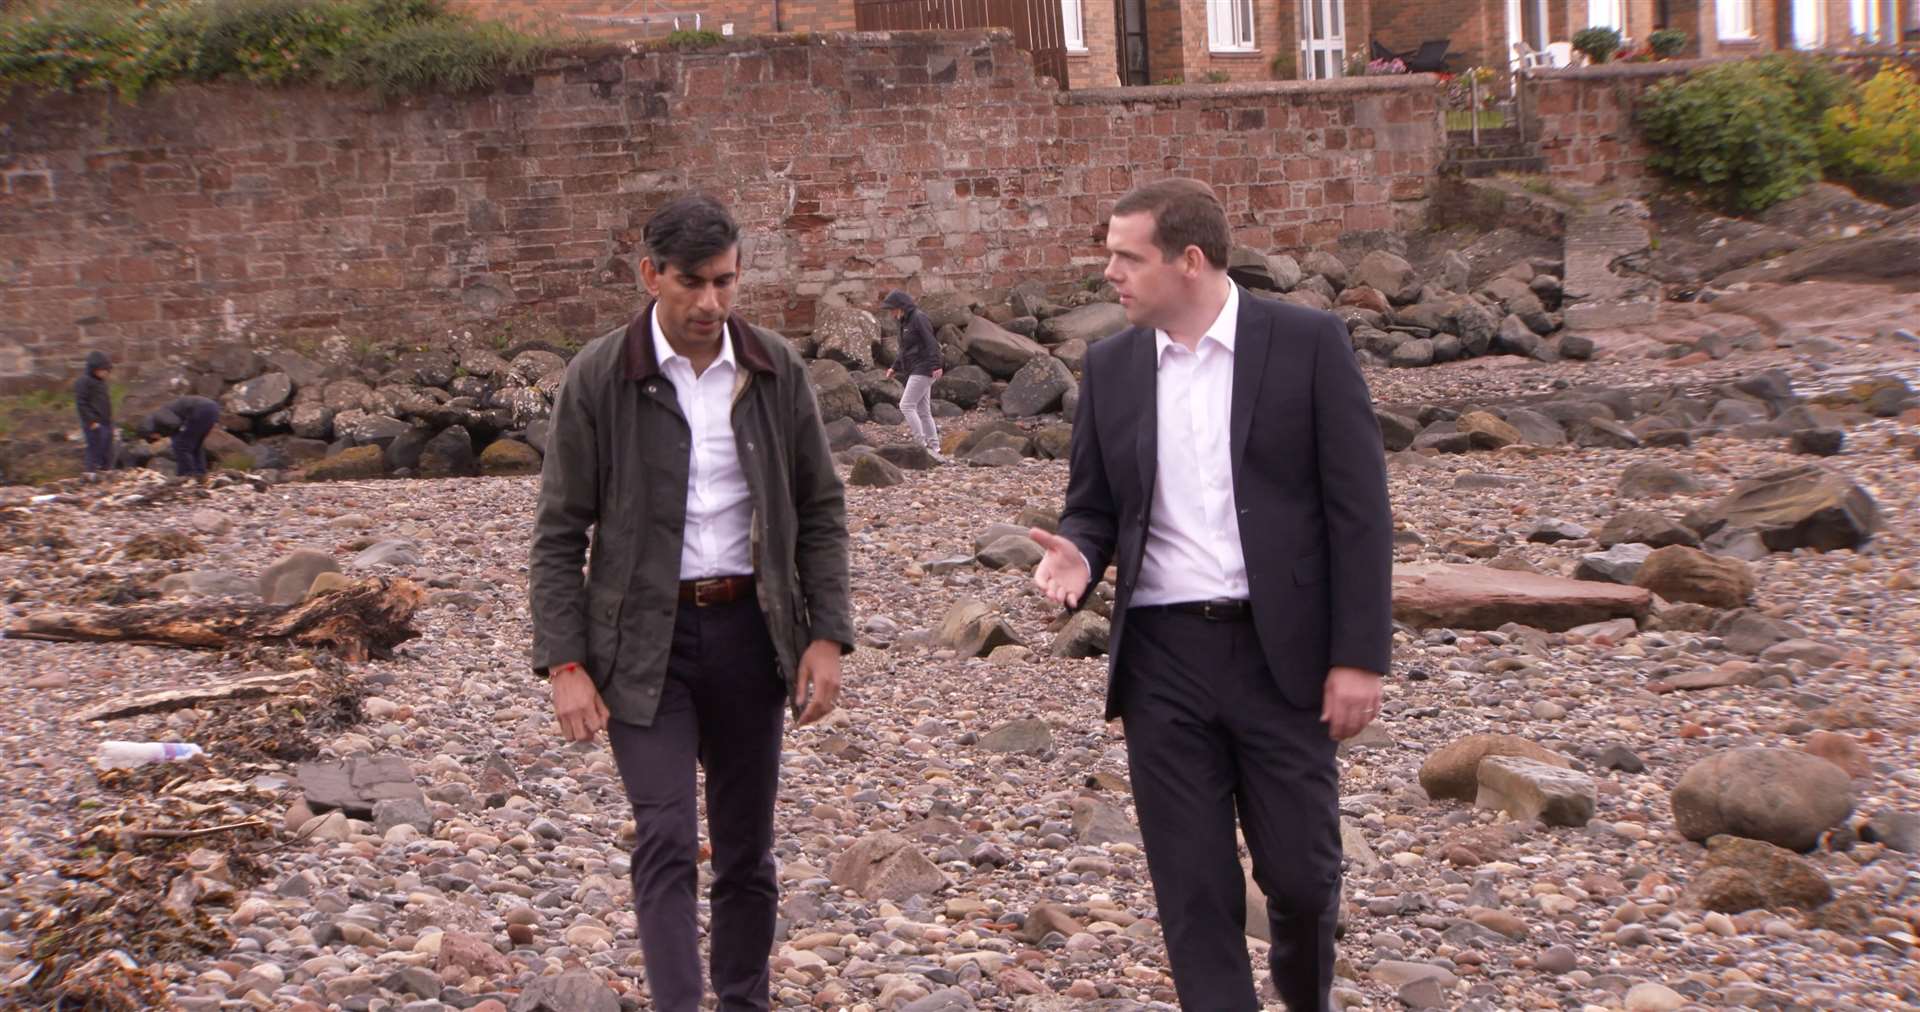 Moray MP Douglas Ross (right) chats to Chancellor of the Exchequer Rishni Sunak. Picture: Moray Conservatives